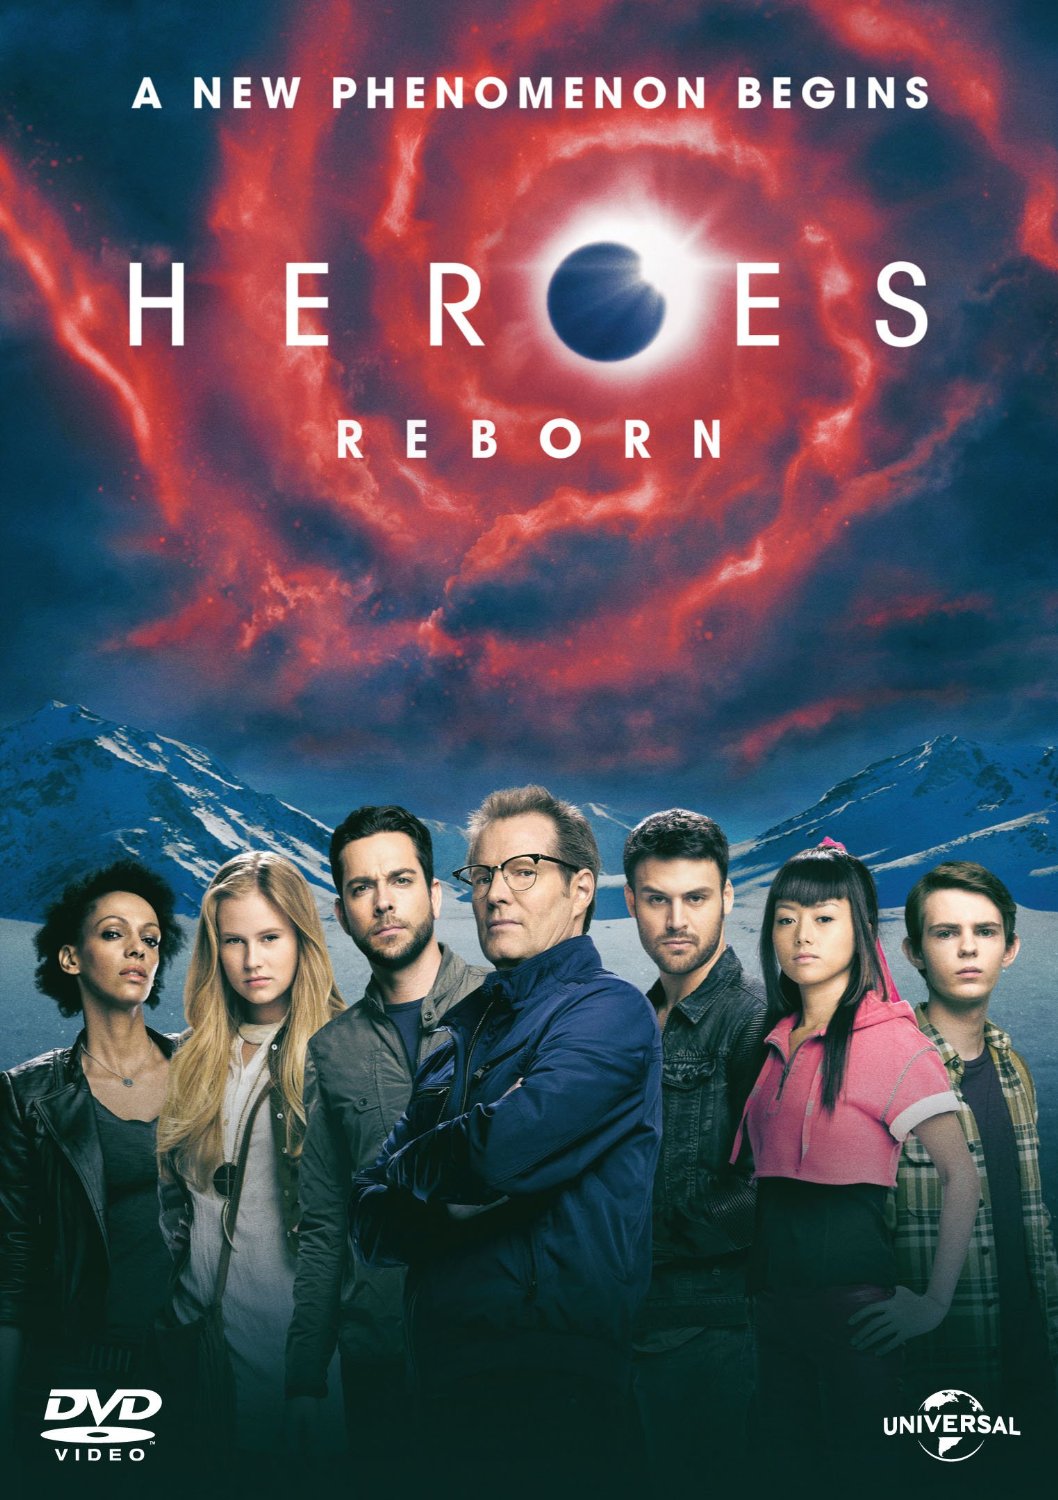 Heroes Reborn Blu-ray review: worth the wait?